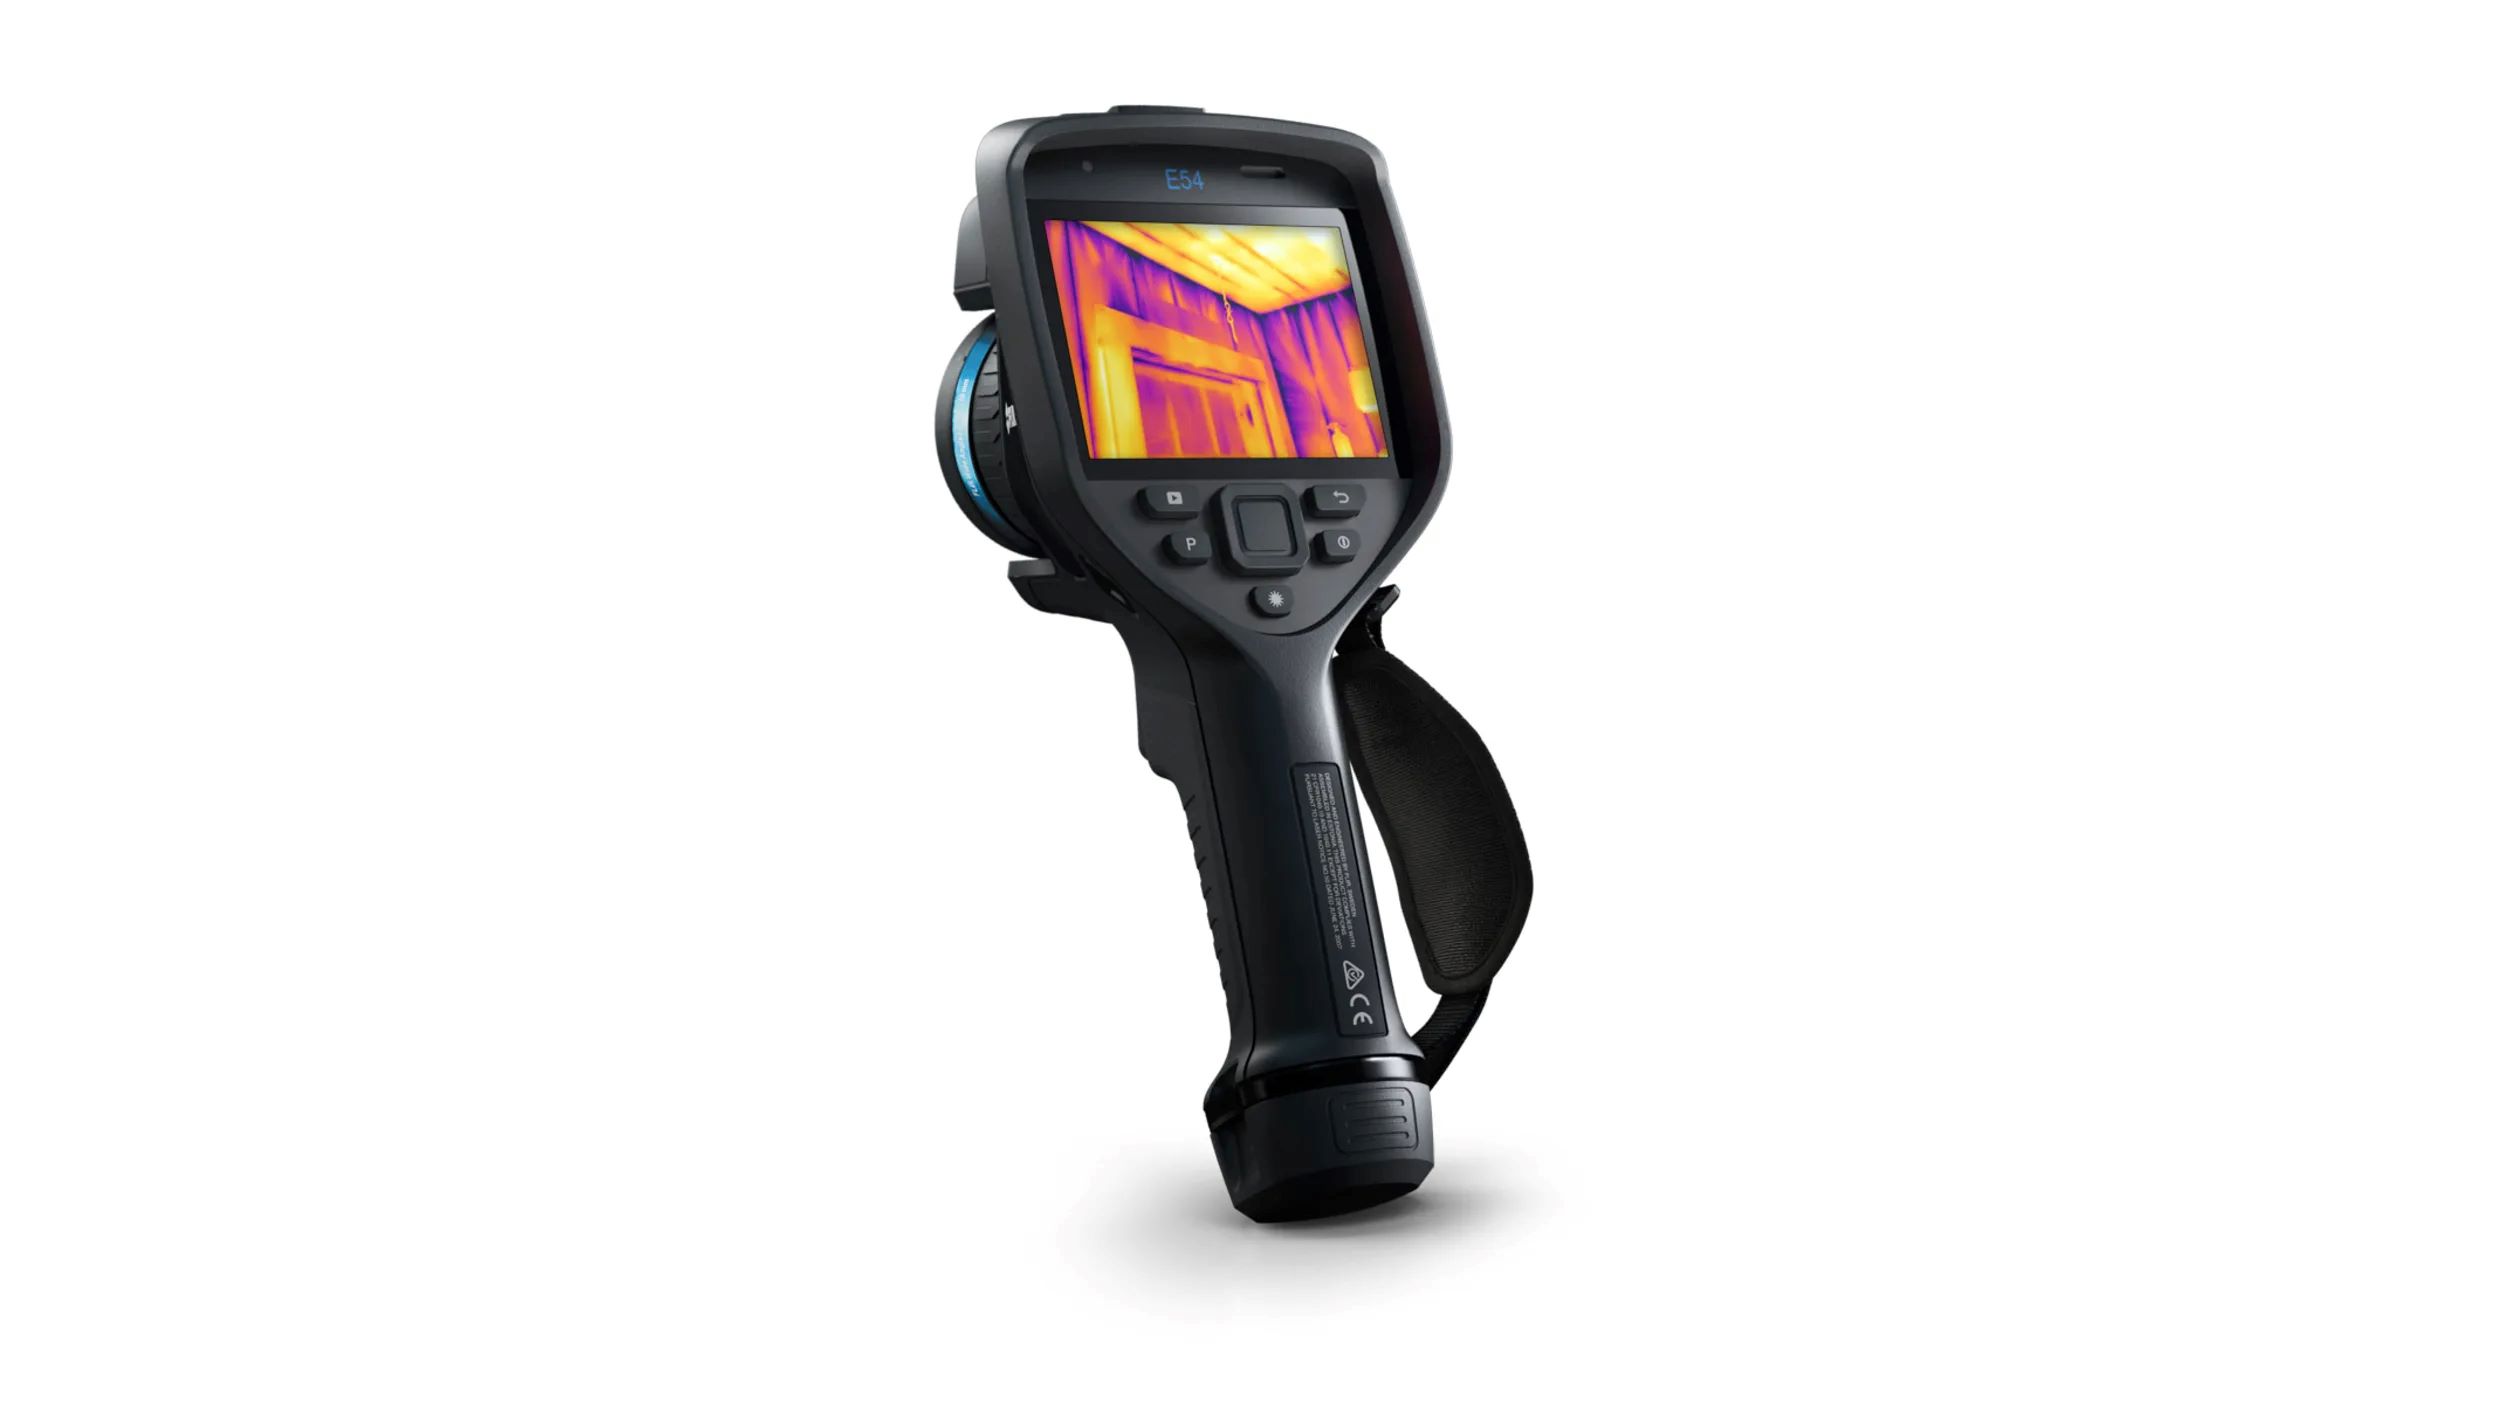 Thermal Imaging Camera Review: Unbiased Analysis and Recommendations